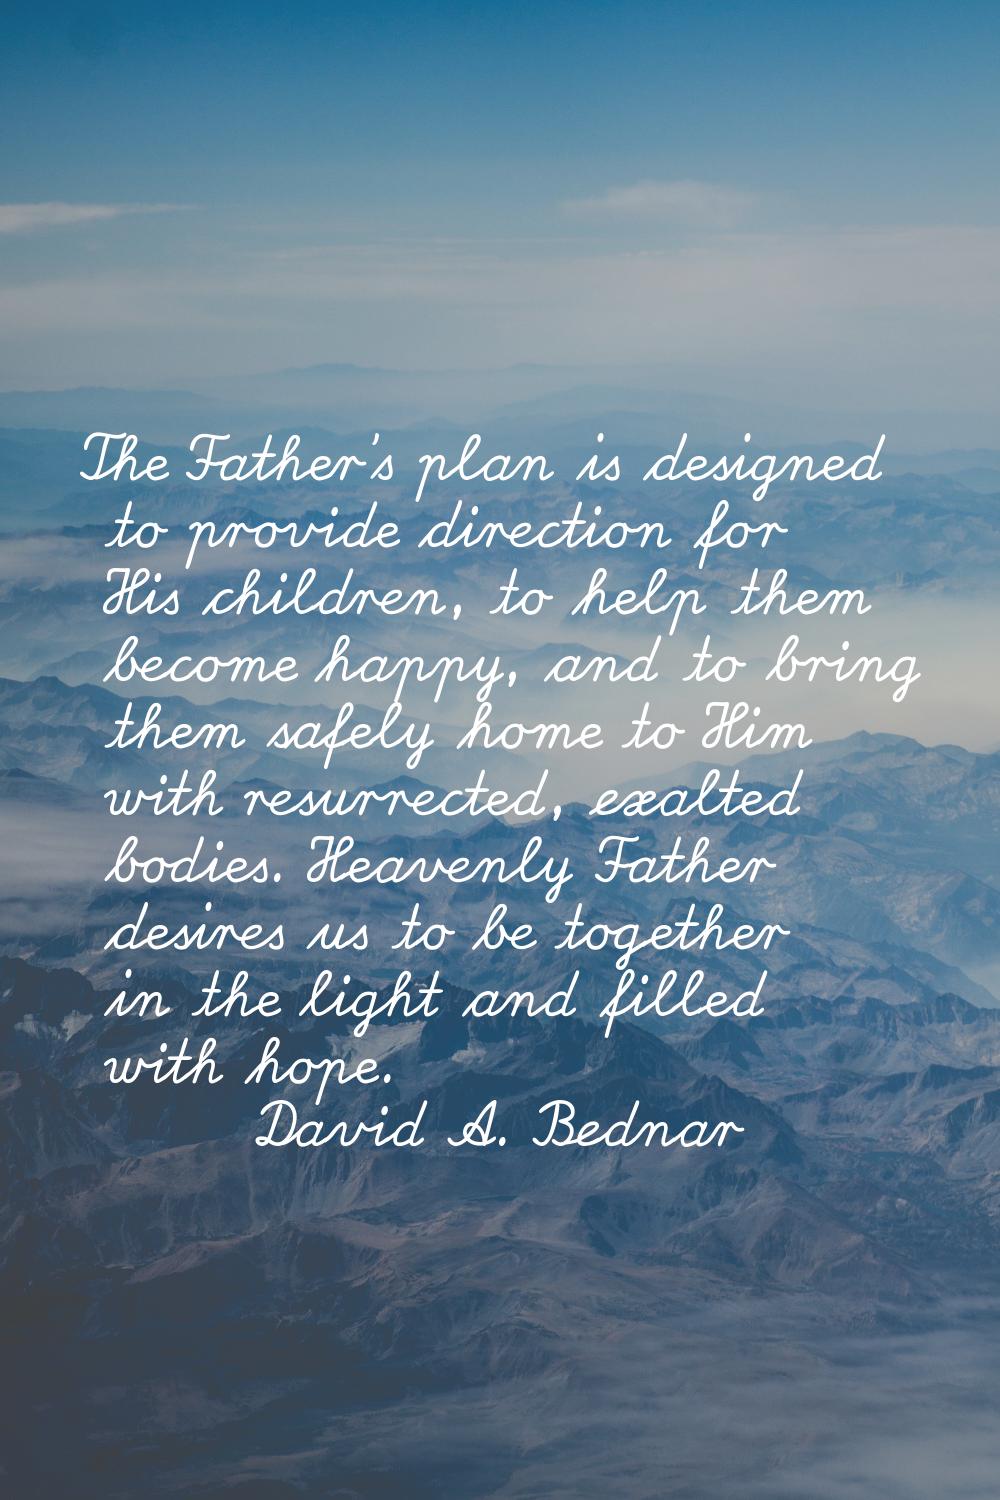 The Father's plan is designed to provide direction for His children, to help them become happy, and